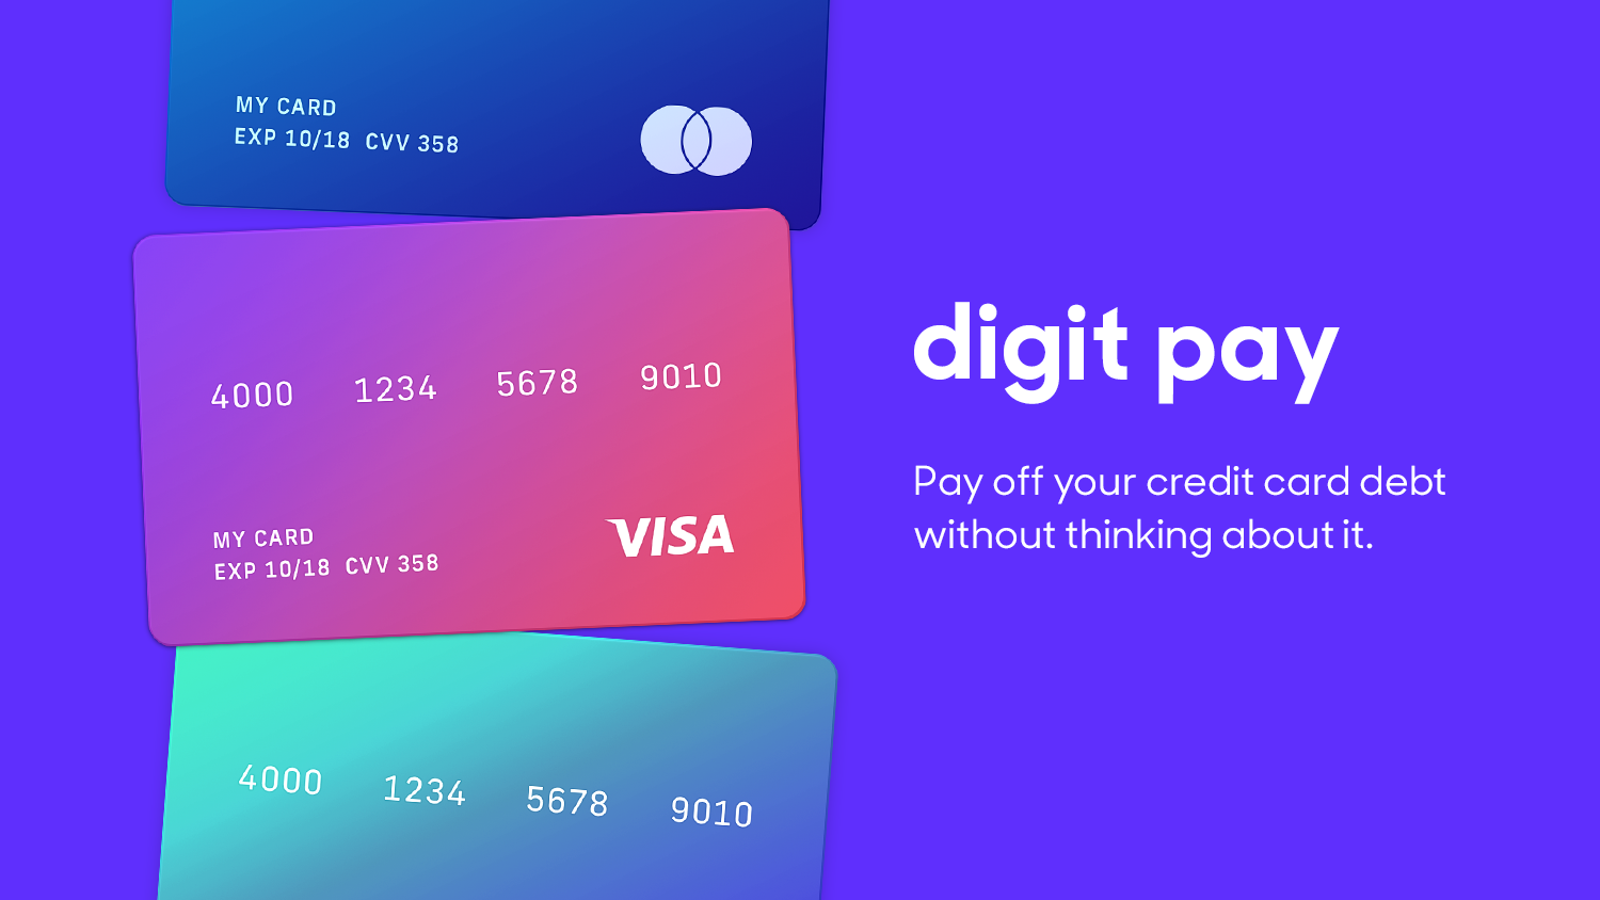 Pay Off Your Credit Card Debt With the Help of the Savings App Digit